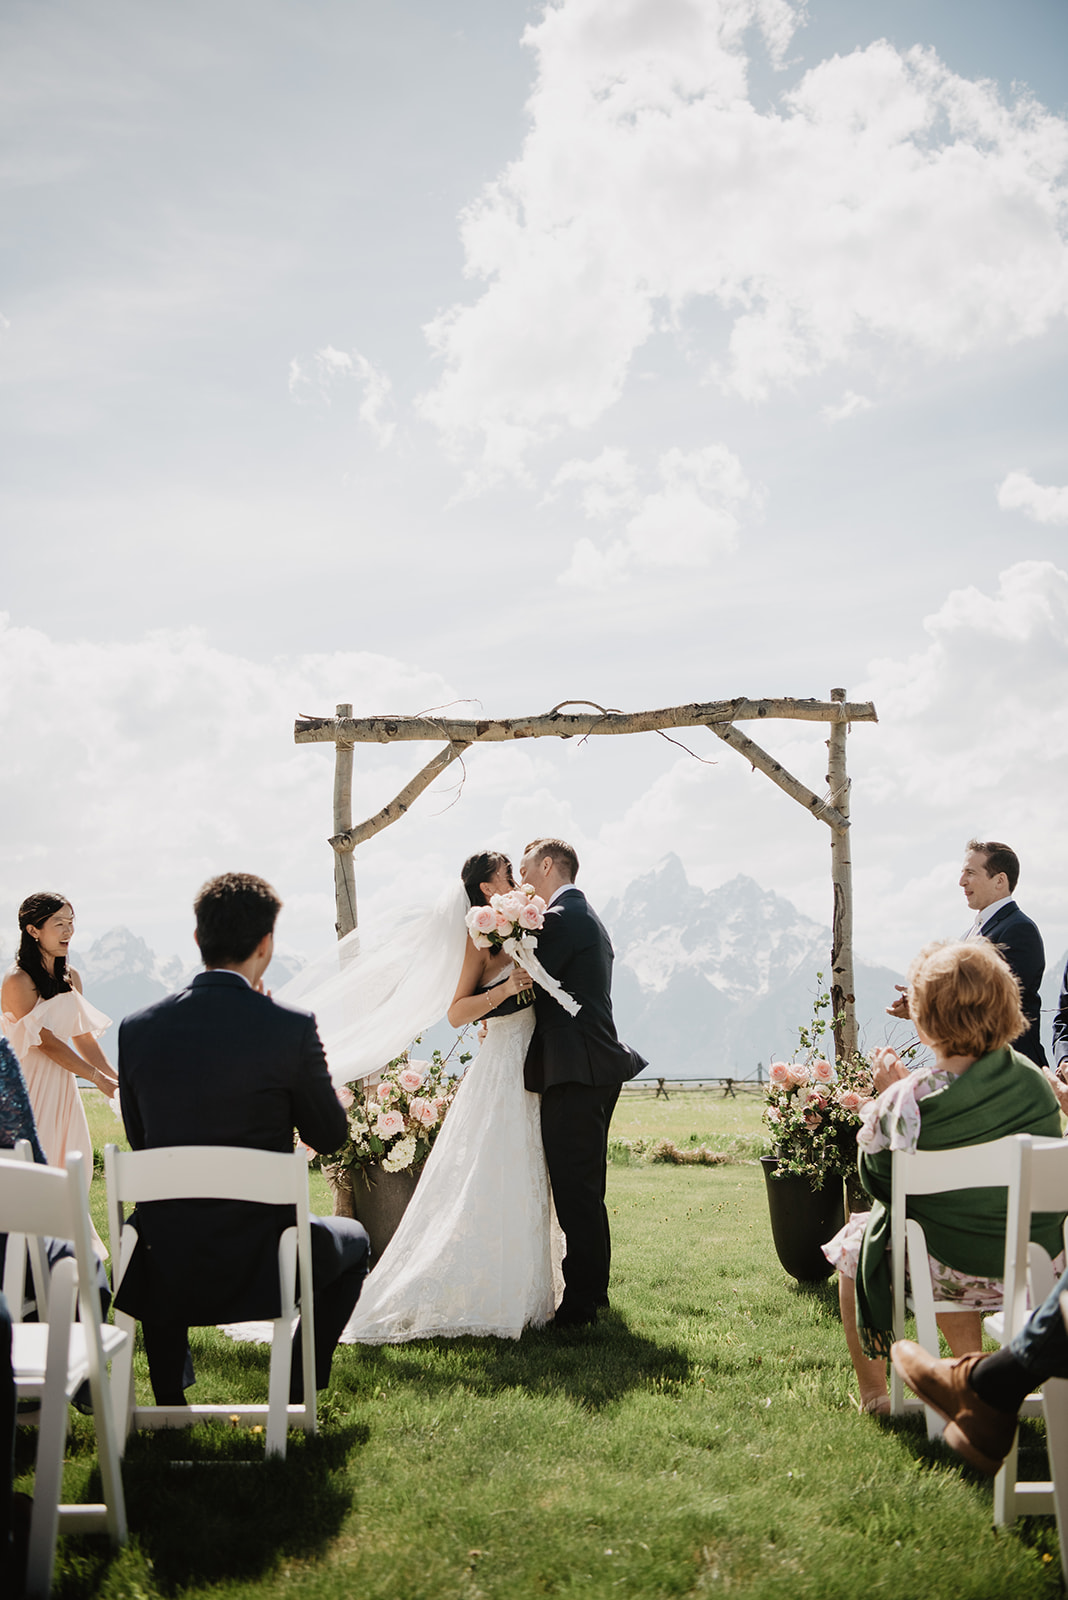 wedding ceremony with a view of the Tetons with the bride and groom kissing at the end of the ceremony